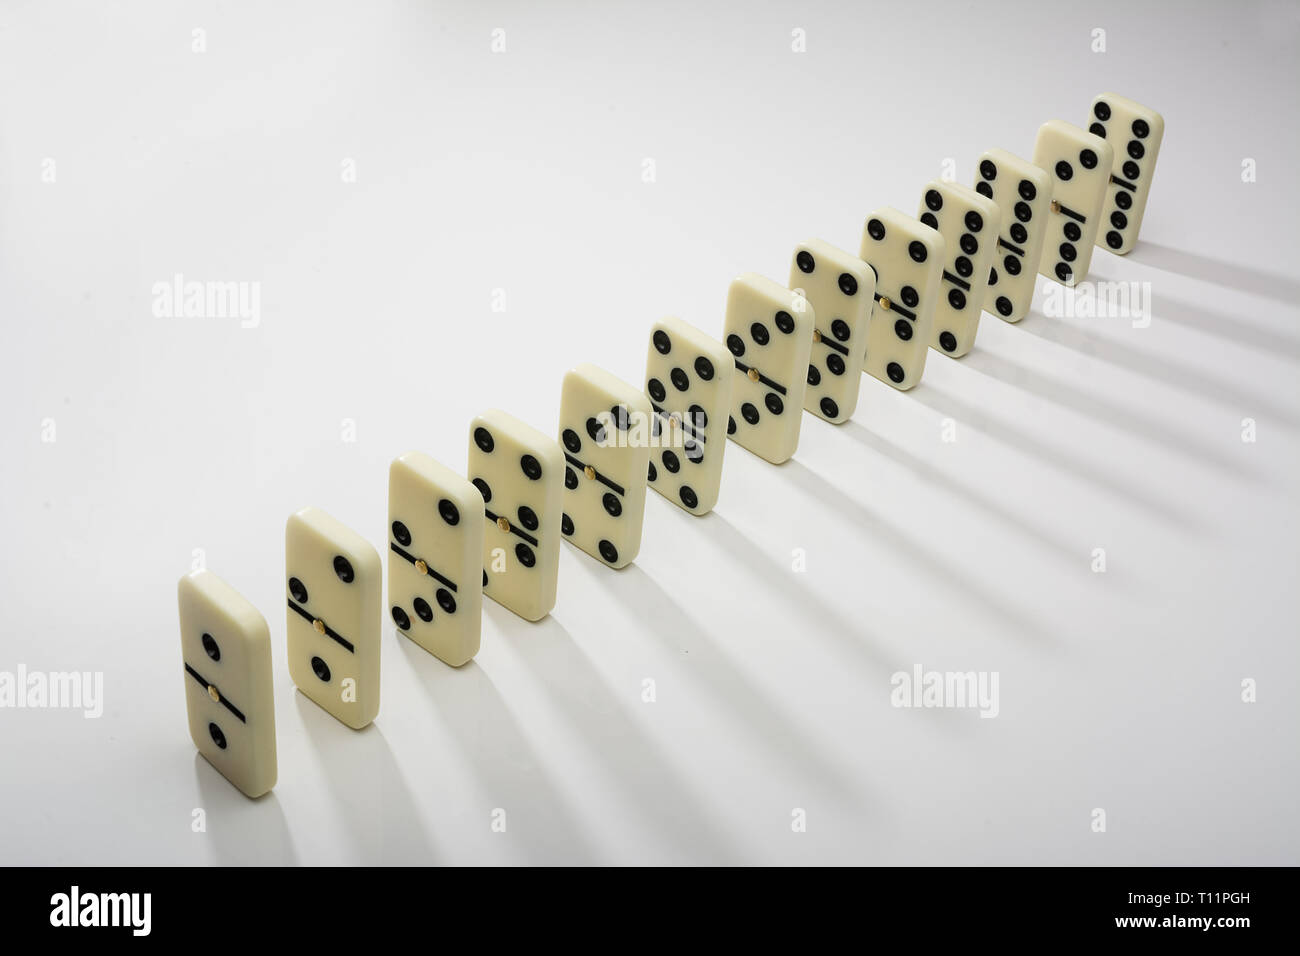 domino tiles in a row on a white background Stock Photo